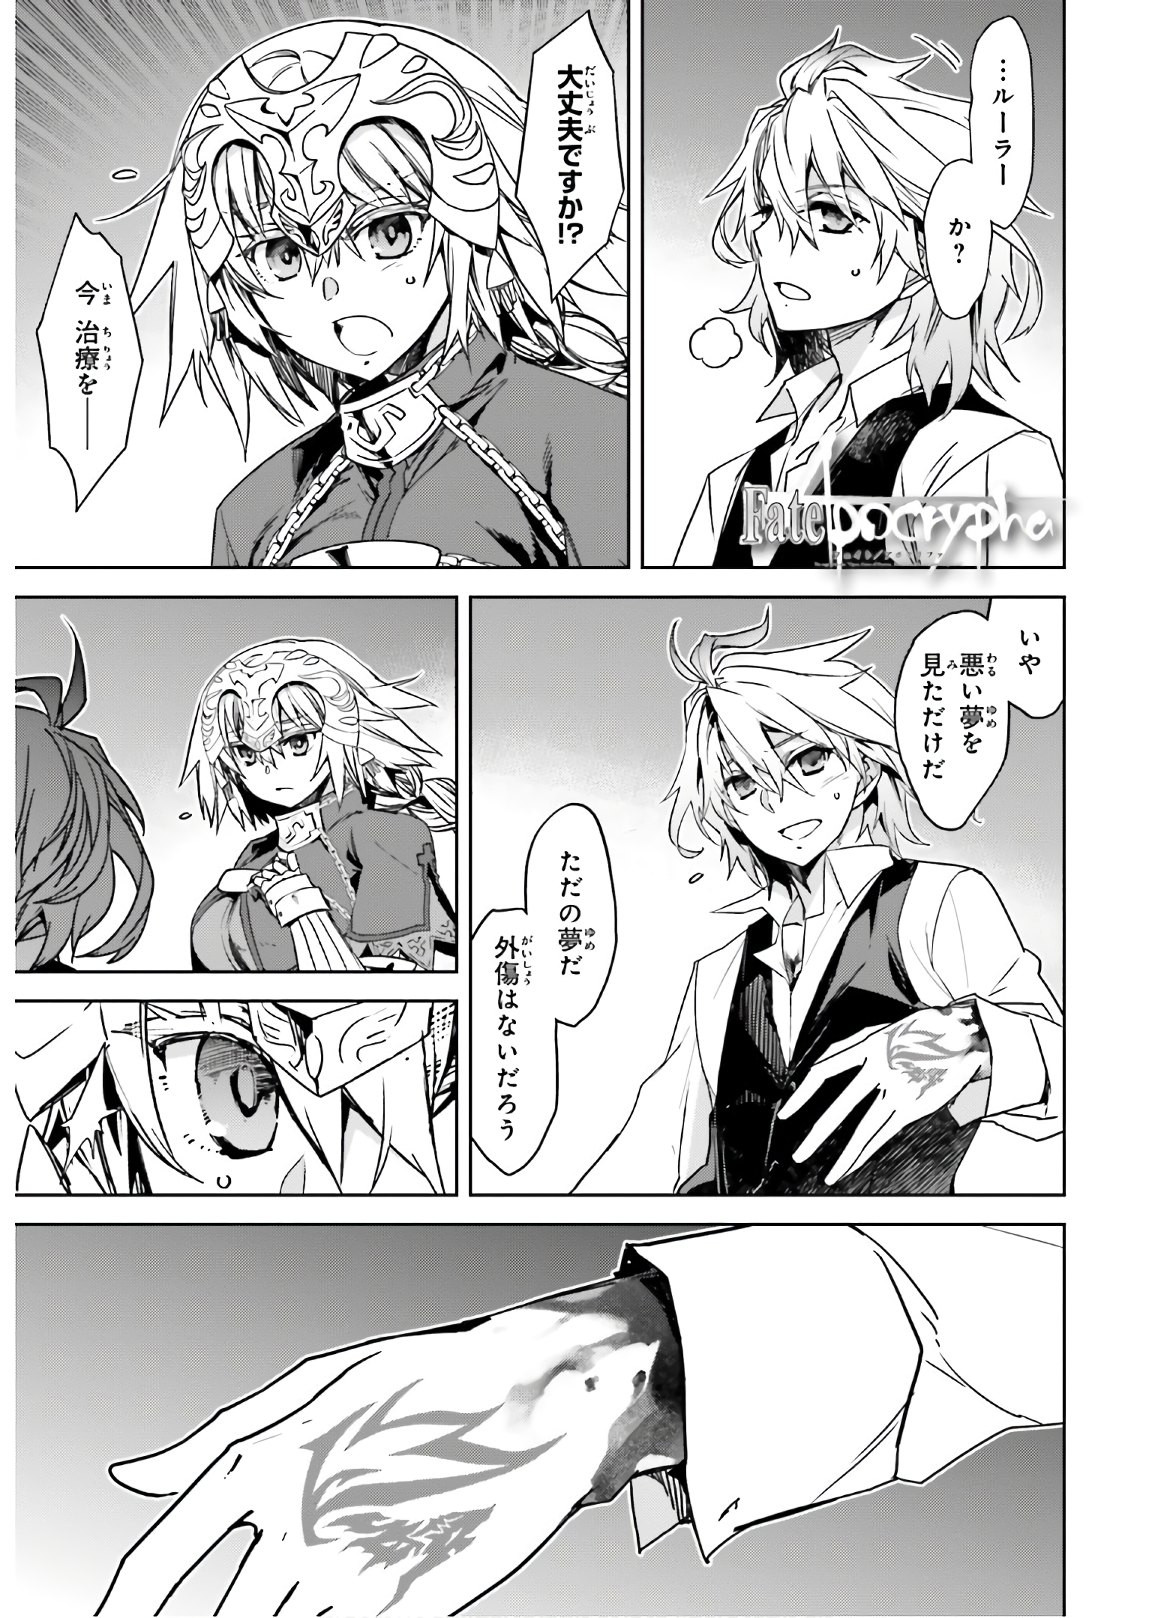 Fate-Apocrypha - Chapter 43 - Page 1